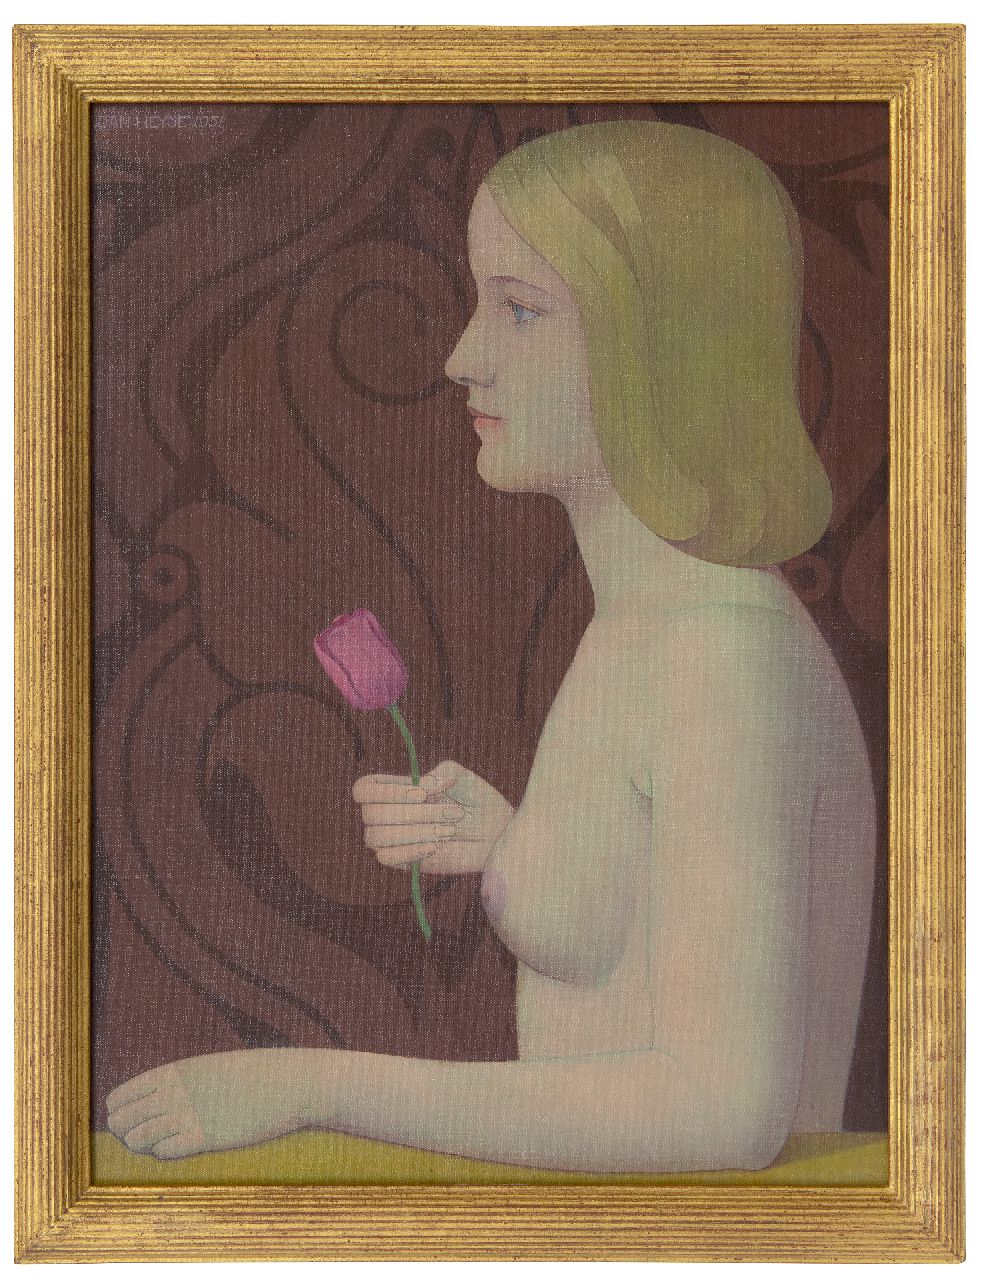 Heyse J.  | Jan Heyse | Paintings offered for sale | Female nude with a tulip, oil on canvas laid down on board 54.6 x 40.3 cm, signed u.l. and dated 1951